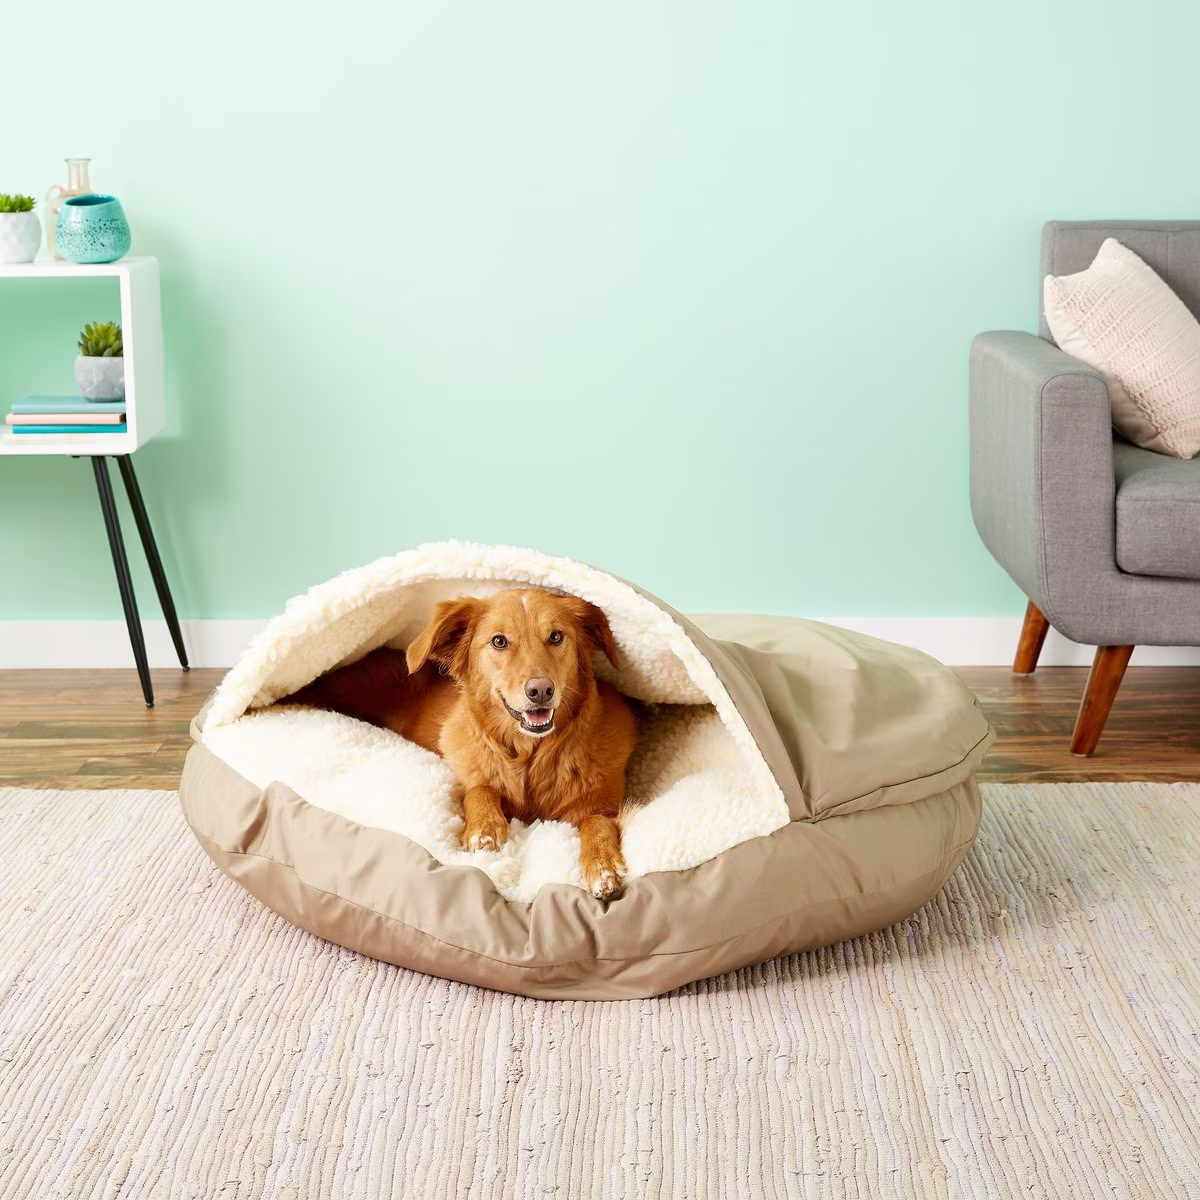 Snoozer Pet Products Cozy Cave Dog Bed